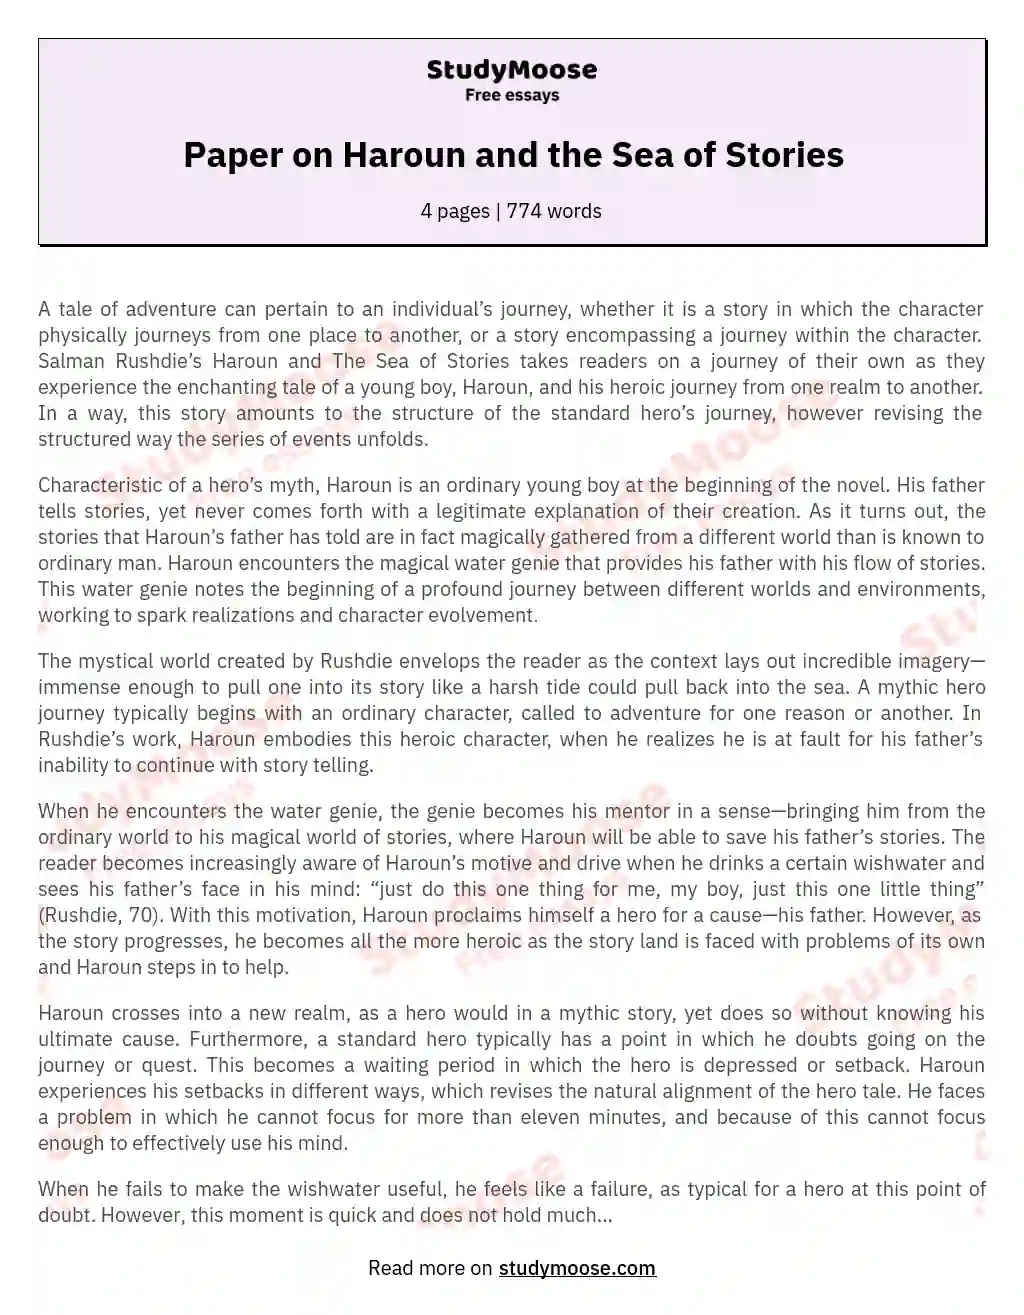 Paper on Haroun and the Sea of Stories